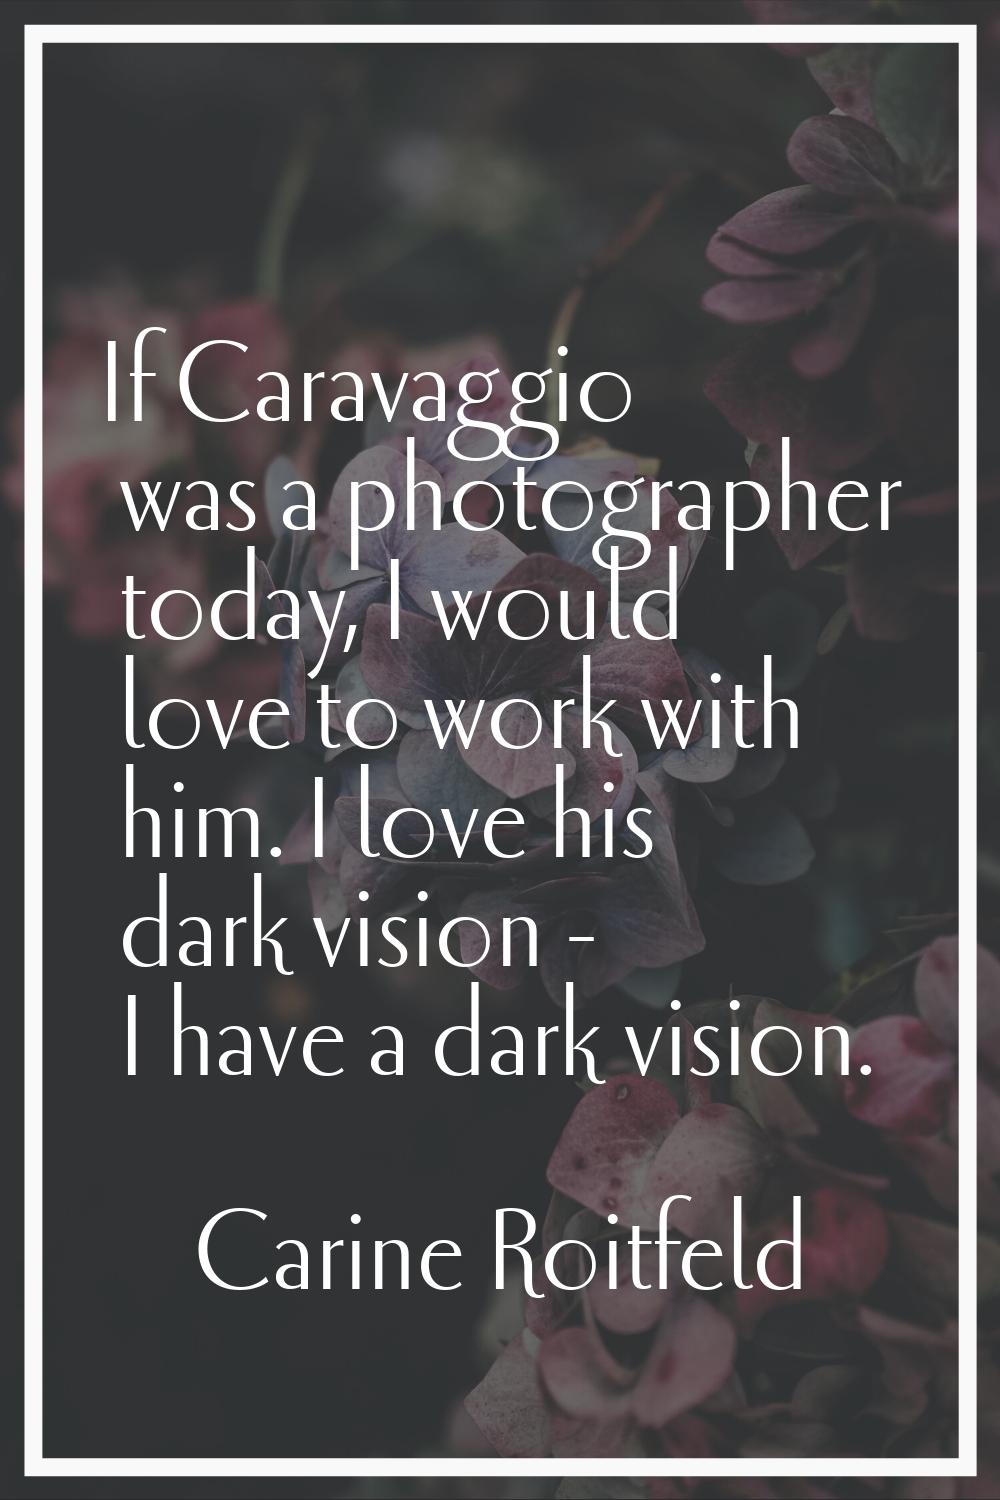 If Caravaggio was a photographer today, I would love to work with him. I love his dark vision - I h